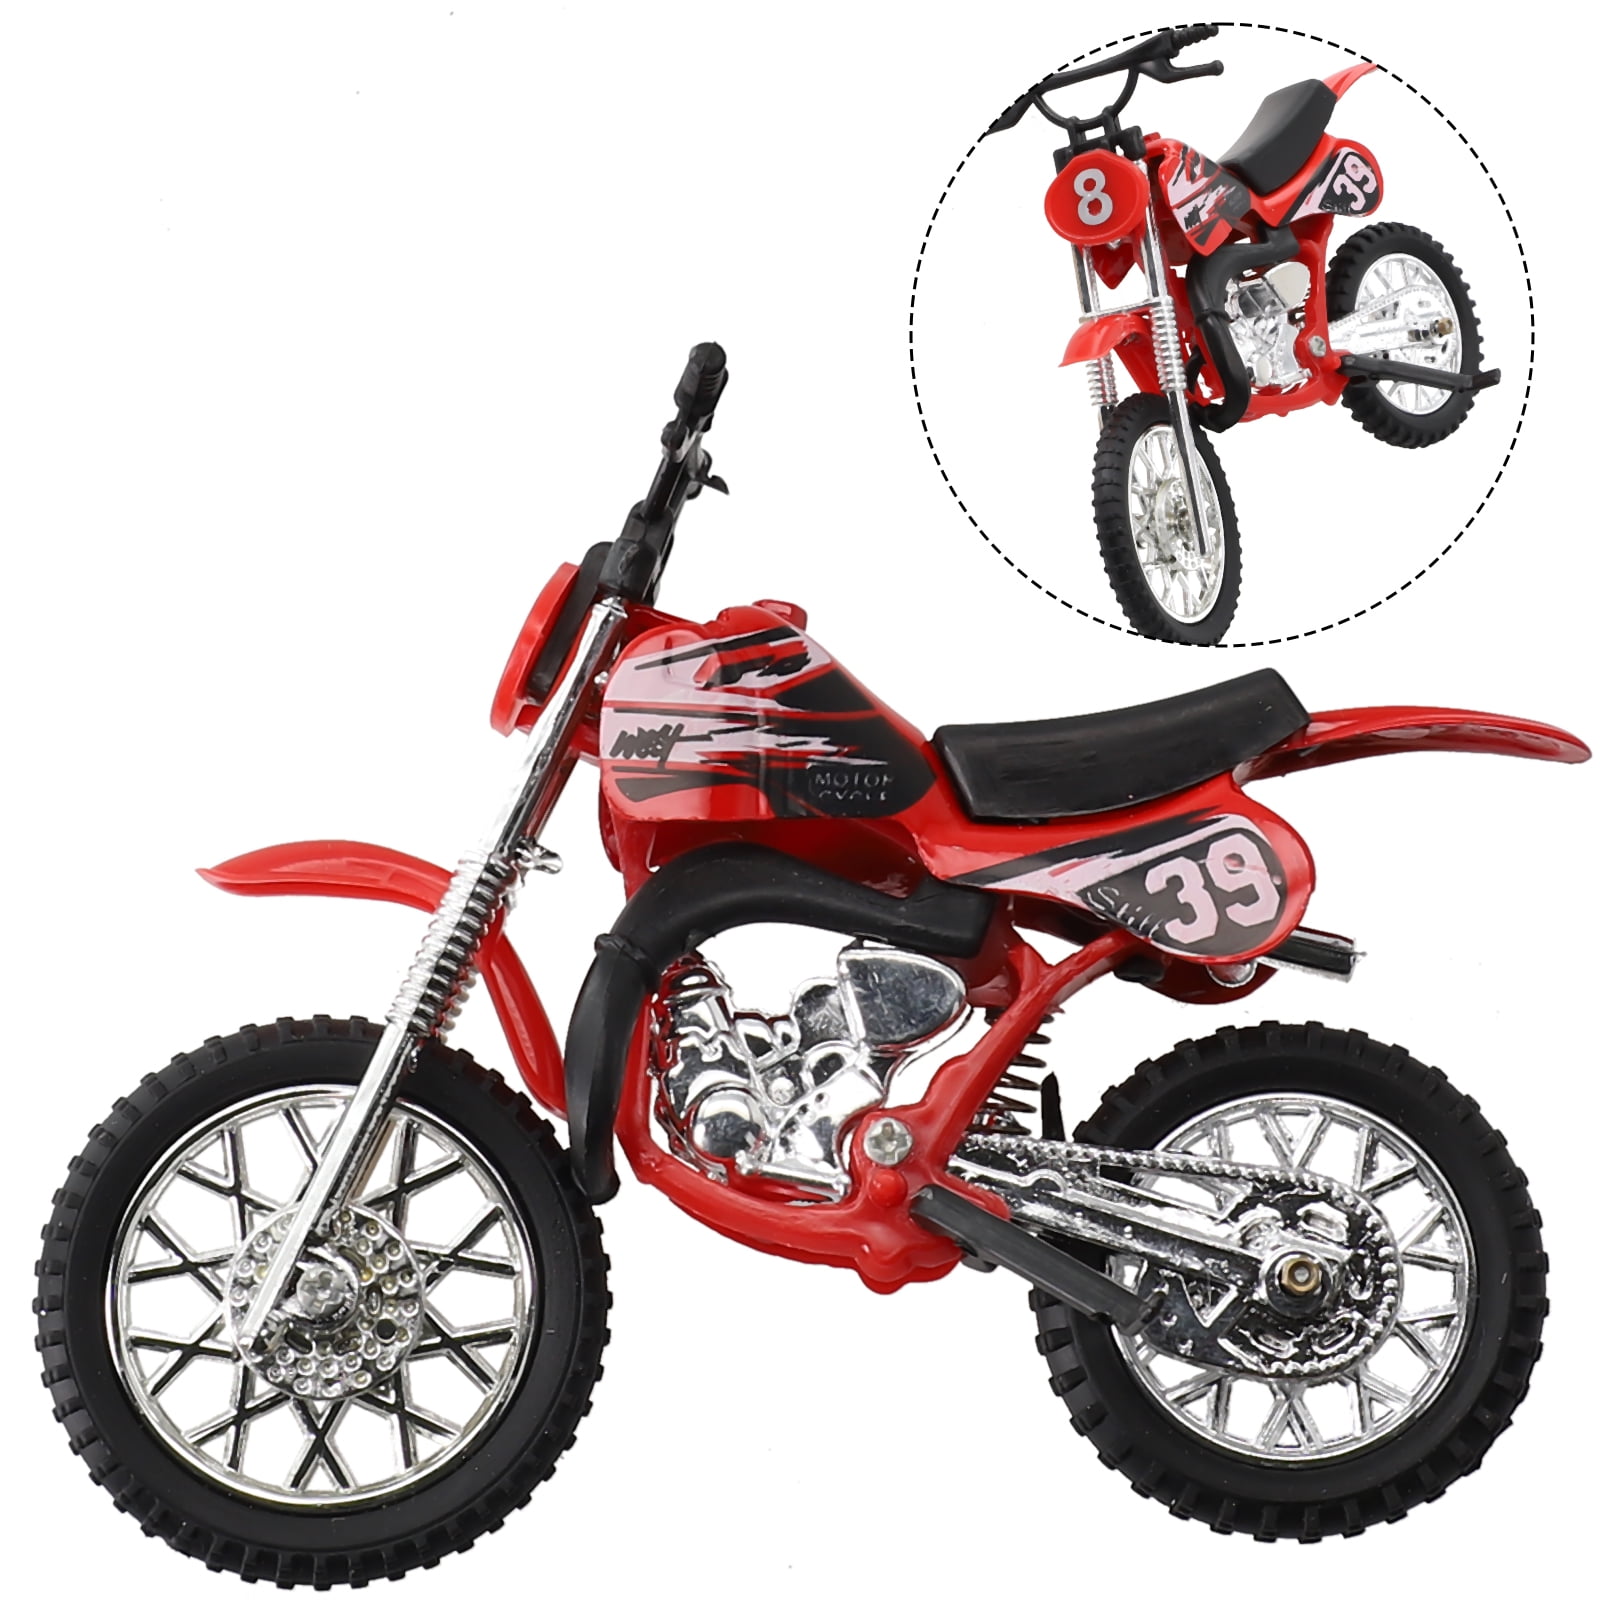 Simulated Alloy Motocross Motorcycle Model 1:18 Toy Adventure Imulation  Alloy Motorcycle Model Home Decoration Kids Toy Gift - AliExpress